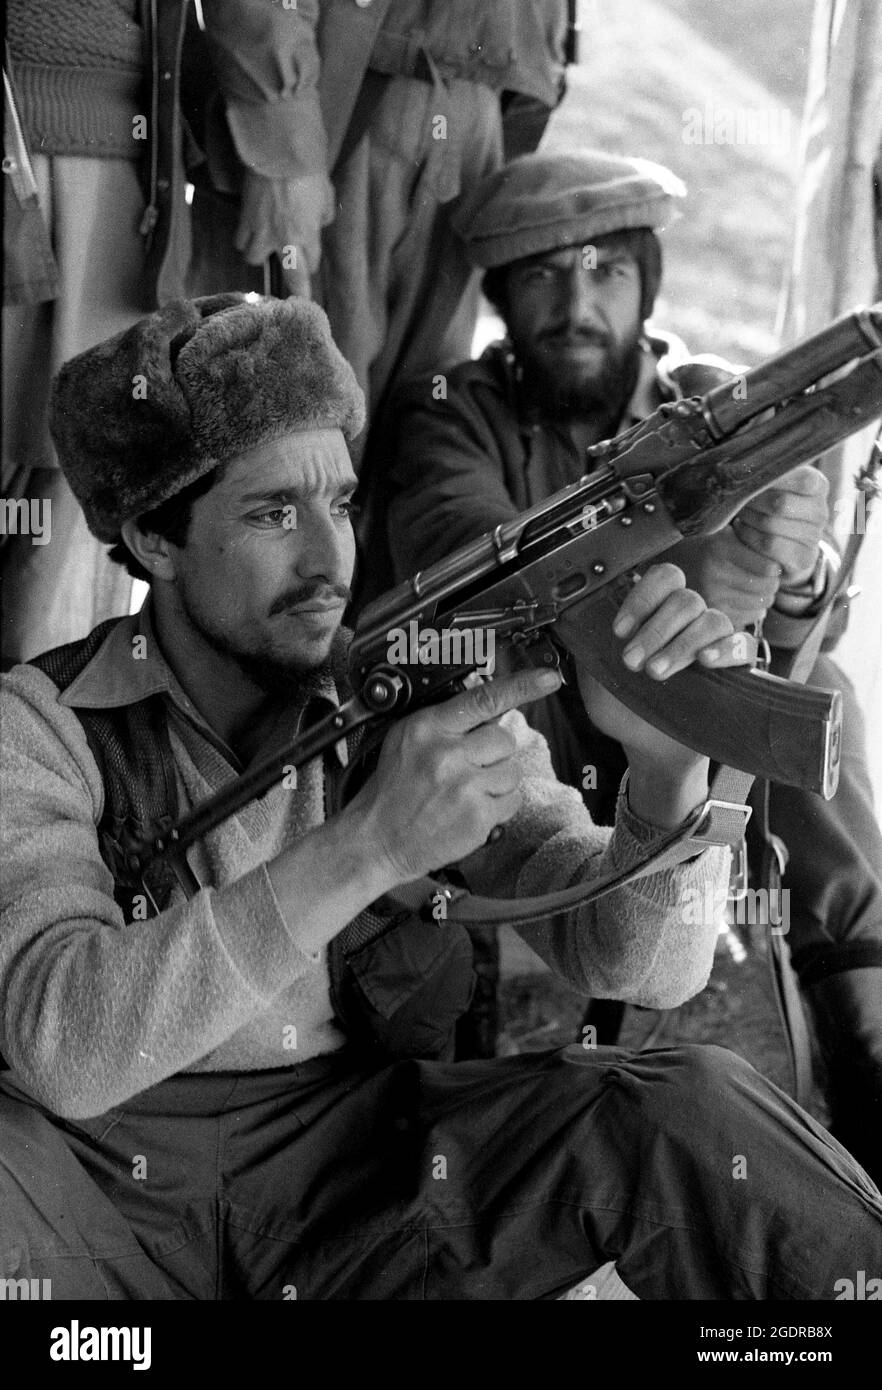 Circa 1980's, Afghanistan: Mujahideen Fighting against USSR. Insurgent groups in Afghanistan (known collectively as the mujahideen) fought a nine-year guerrilla war against the Soviet Army and the Democratic Republic of Afghanistan government throughout the 1980s, mostly in the Afghan countryside. In what was a Cold War-era proxy war, the Mujahideen were backed by the United States, Pakistan, Iran, Saudi Arabia, China, and the United Kingdom. (Credit Image: © Mark Richards/ZUMA Press Wire Service) Stock Photo